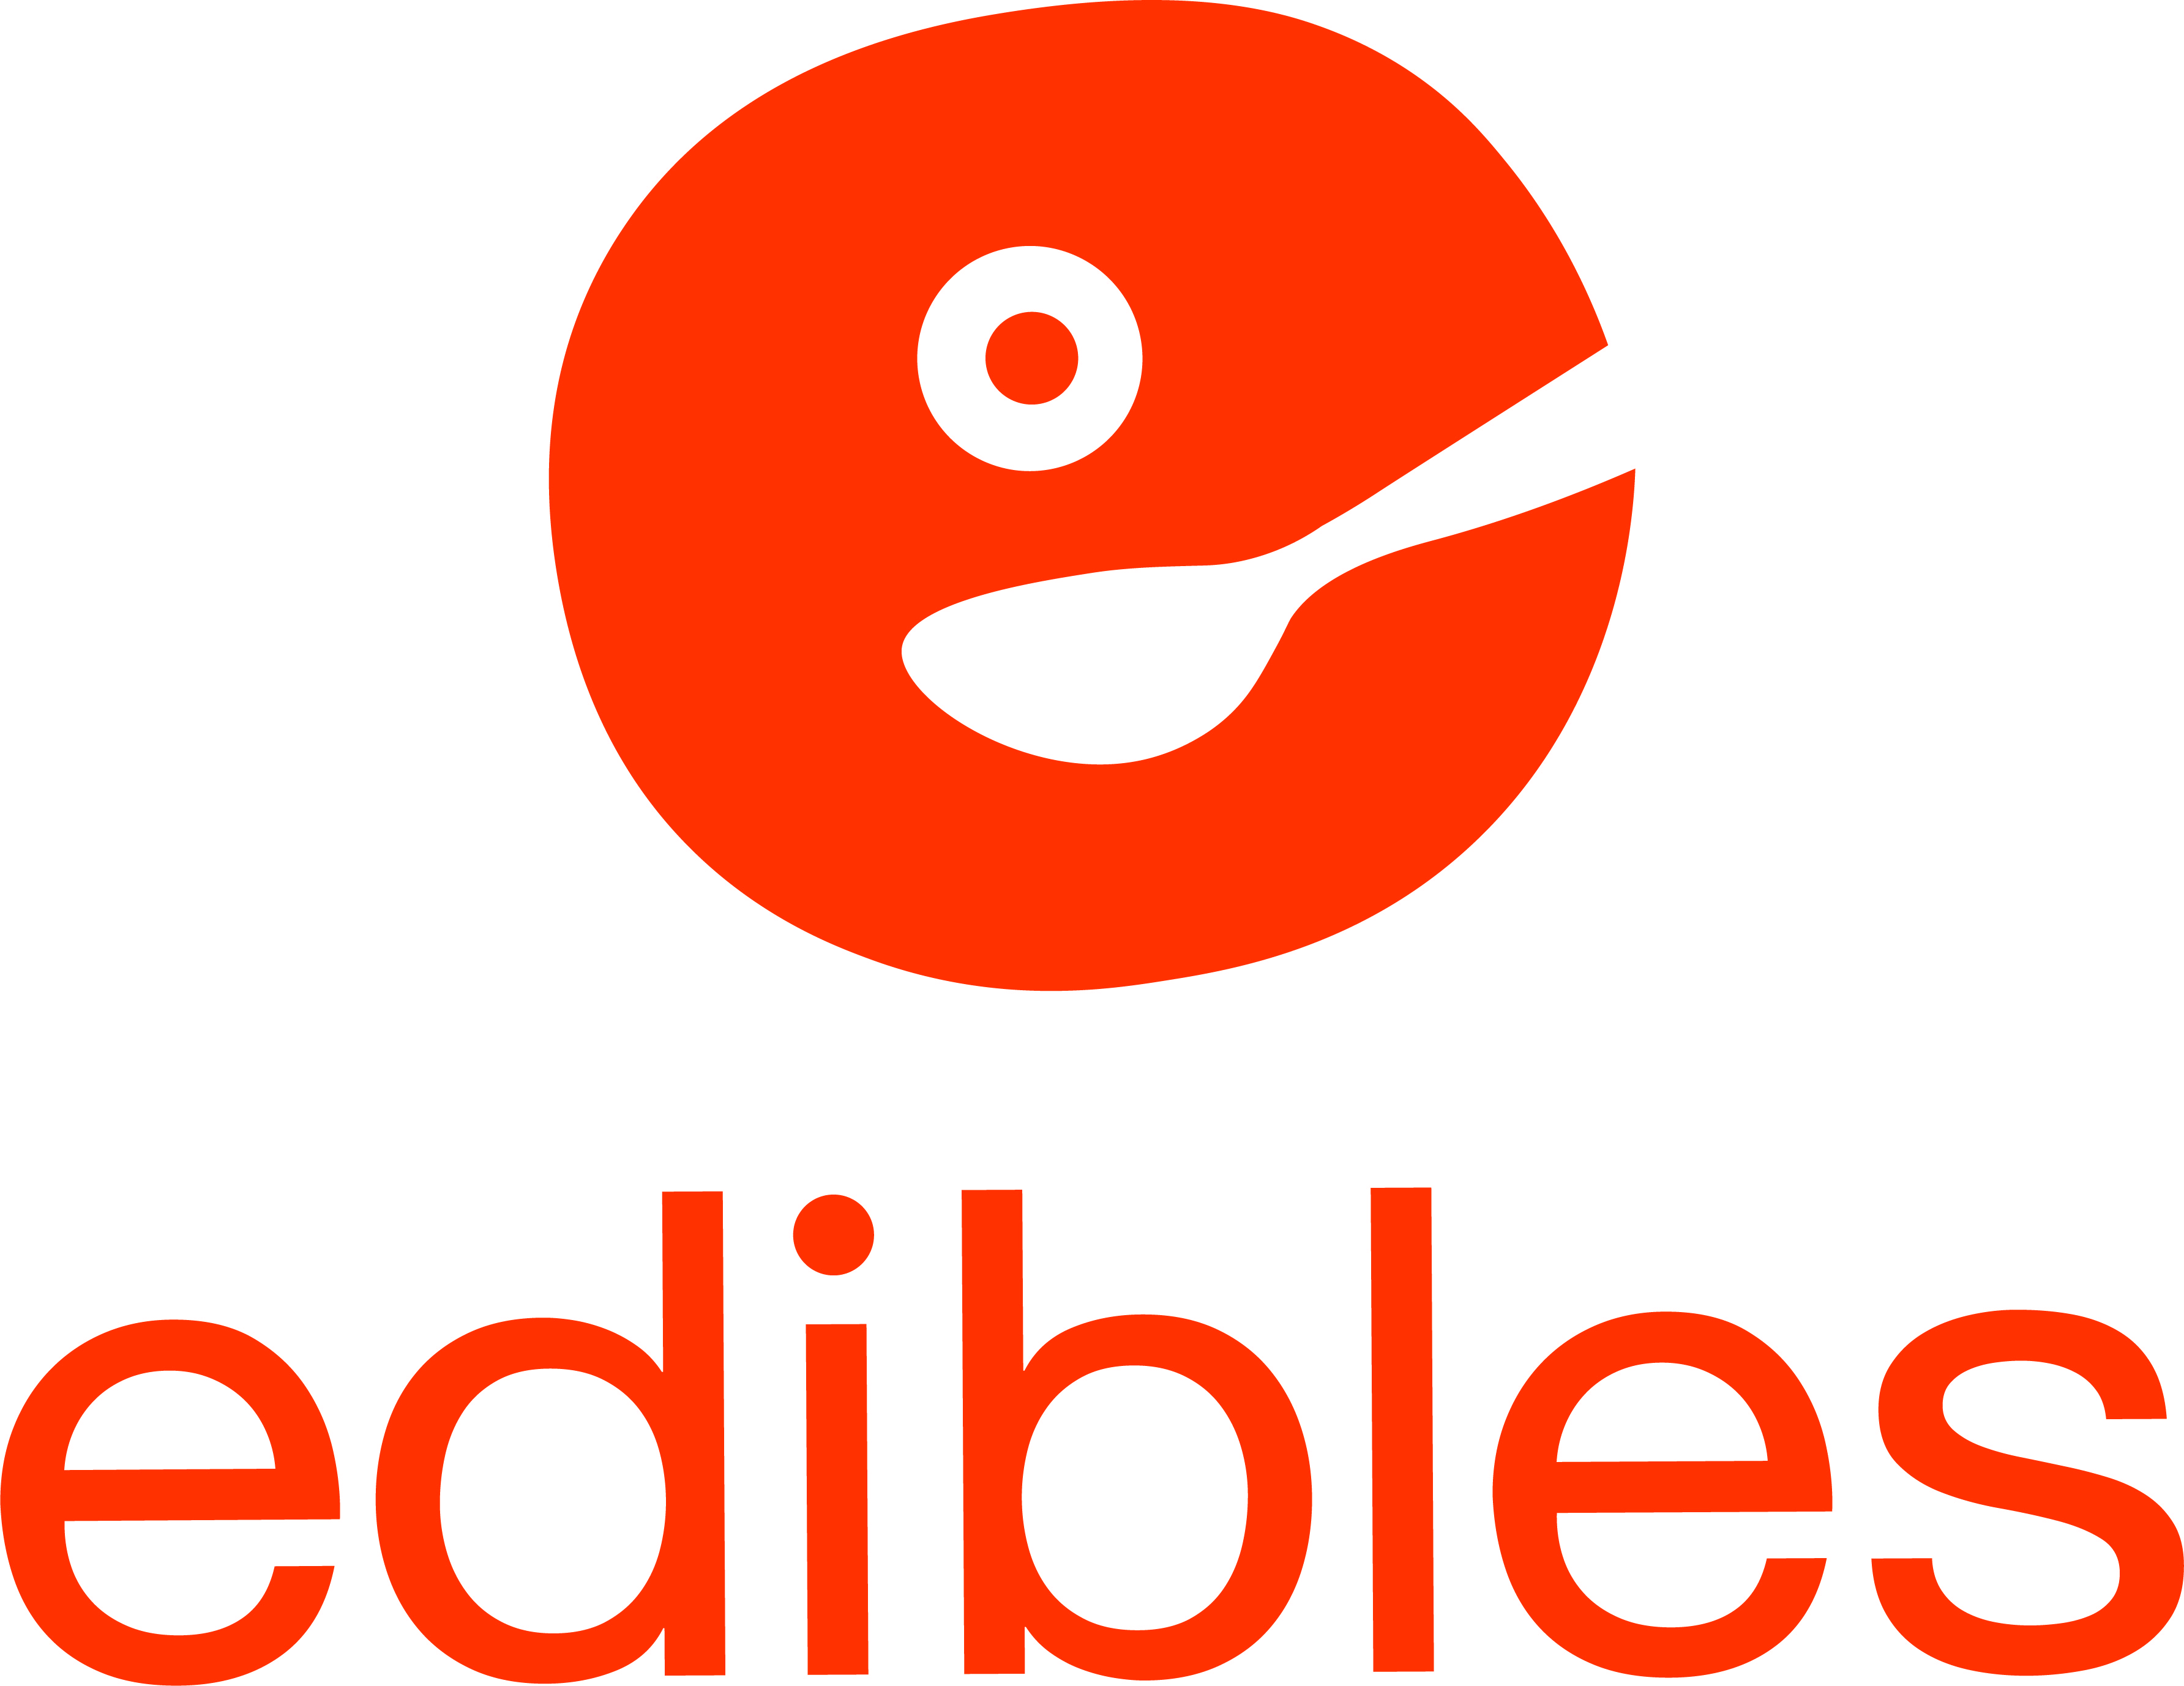 Edibles logo design by logo designer Texas State University  for your inspiration and for the worlds largest logo competition